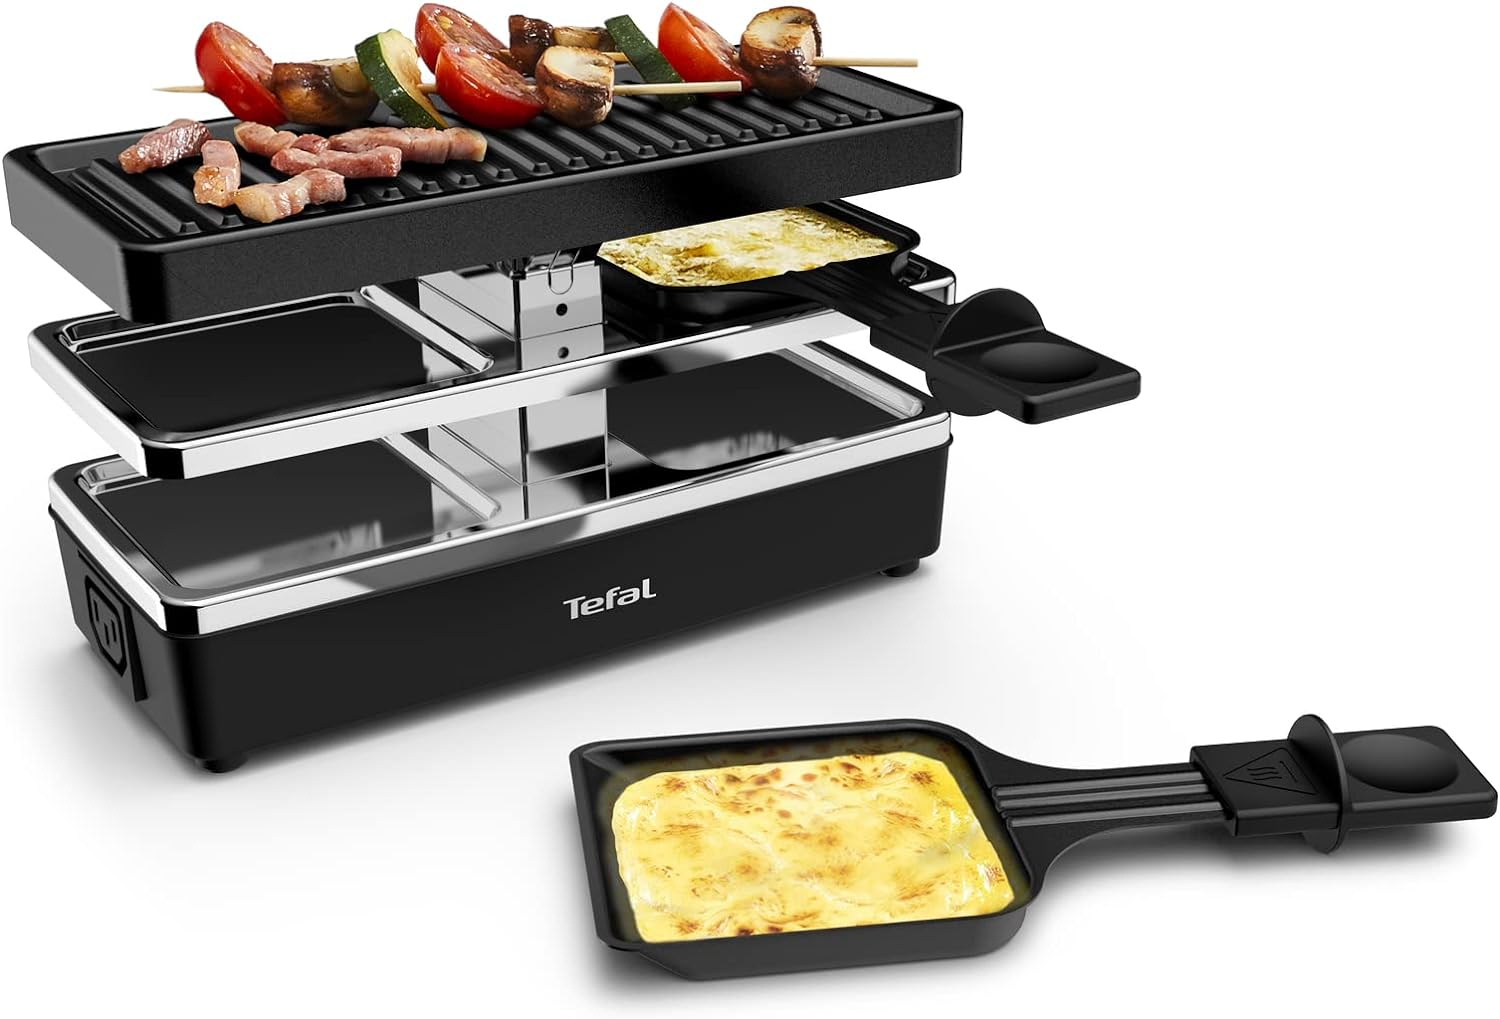 Tefal Raclette Grill 2 Person Modular Format Integrated Plug for Connecting Other Devices Compact Plug & Share YY5249FB